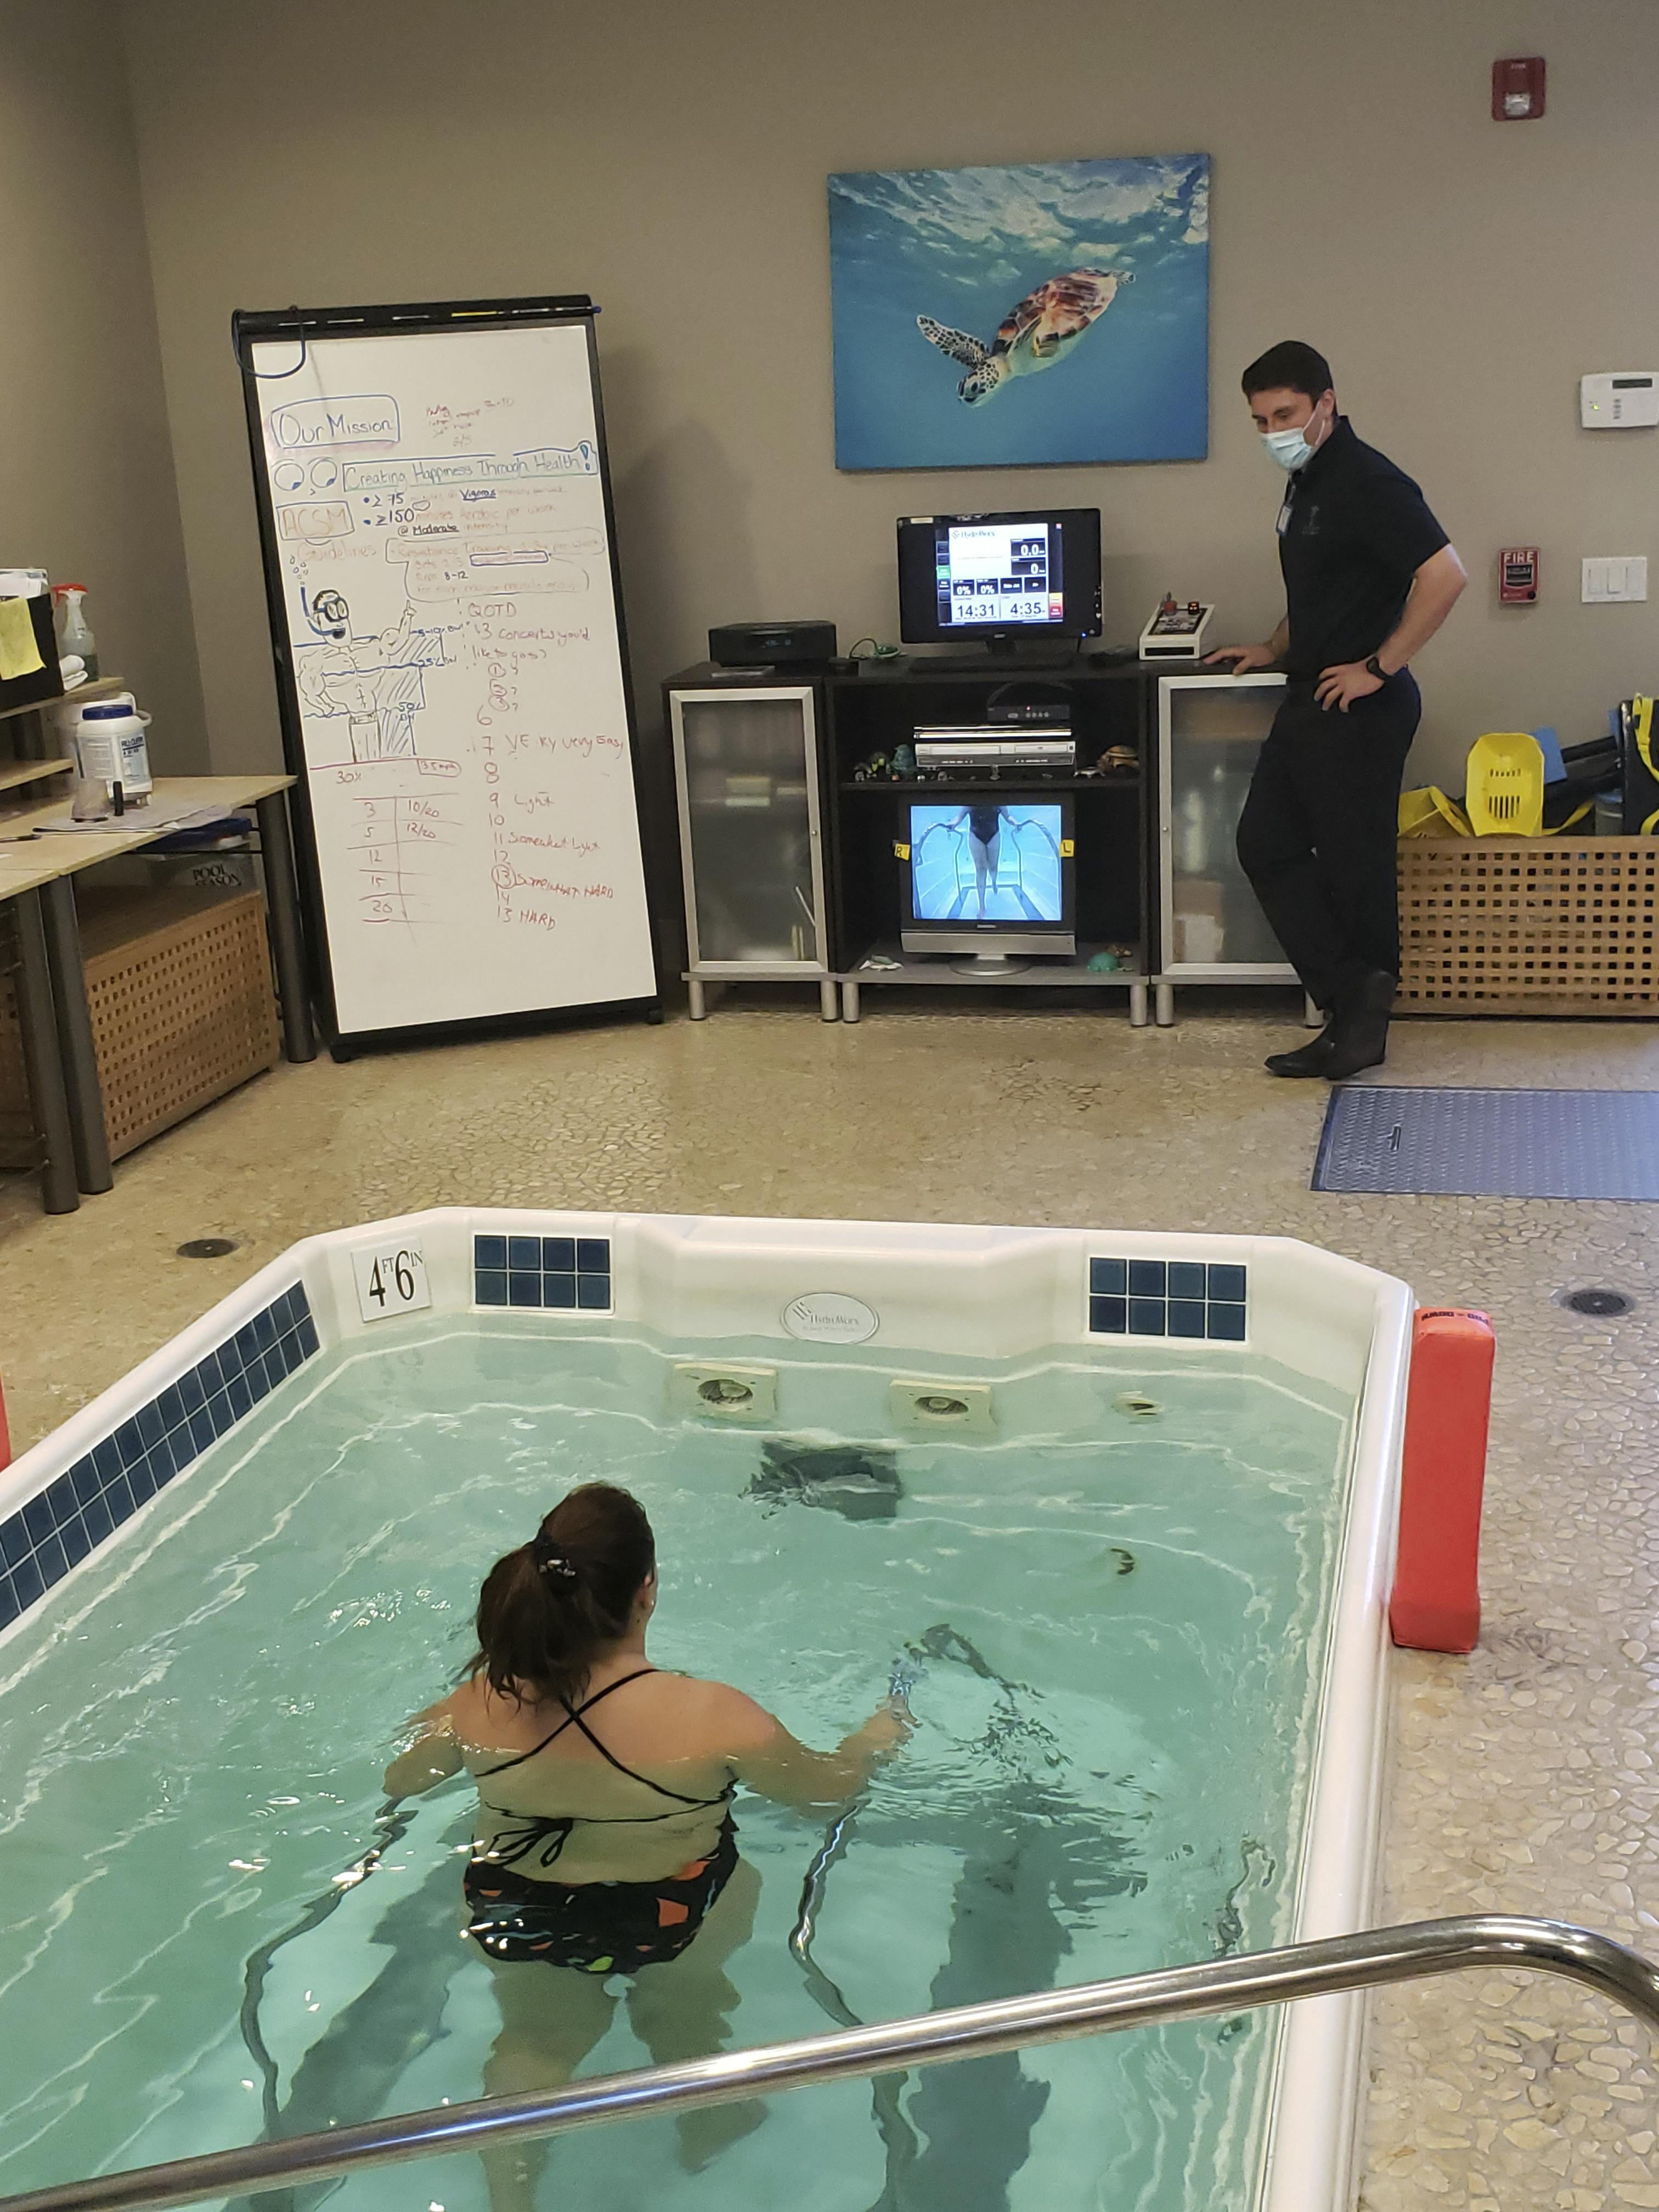 How to Get the Most Out of Your Aquatic Exercise - HydroWorx